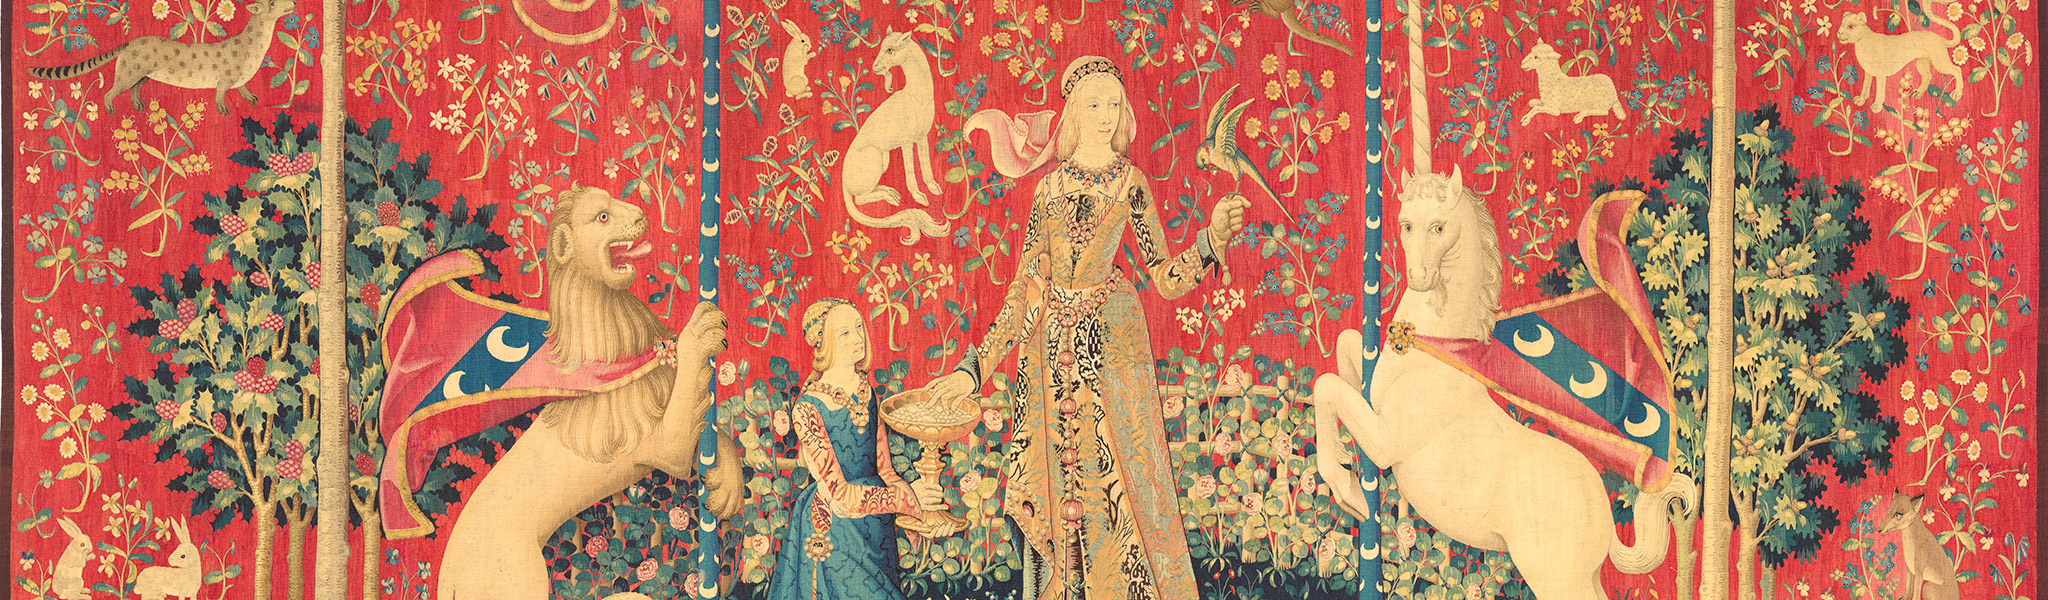 The Lady and the Unicorn tapestries